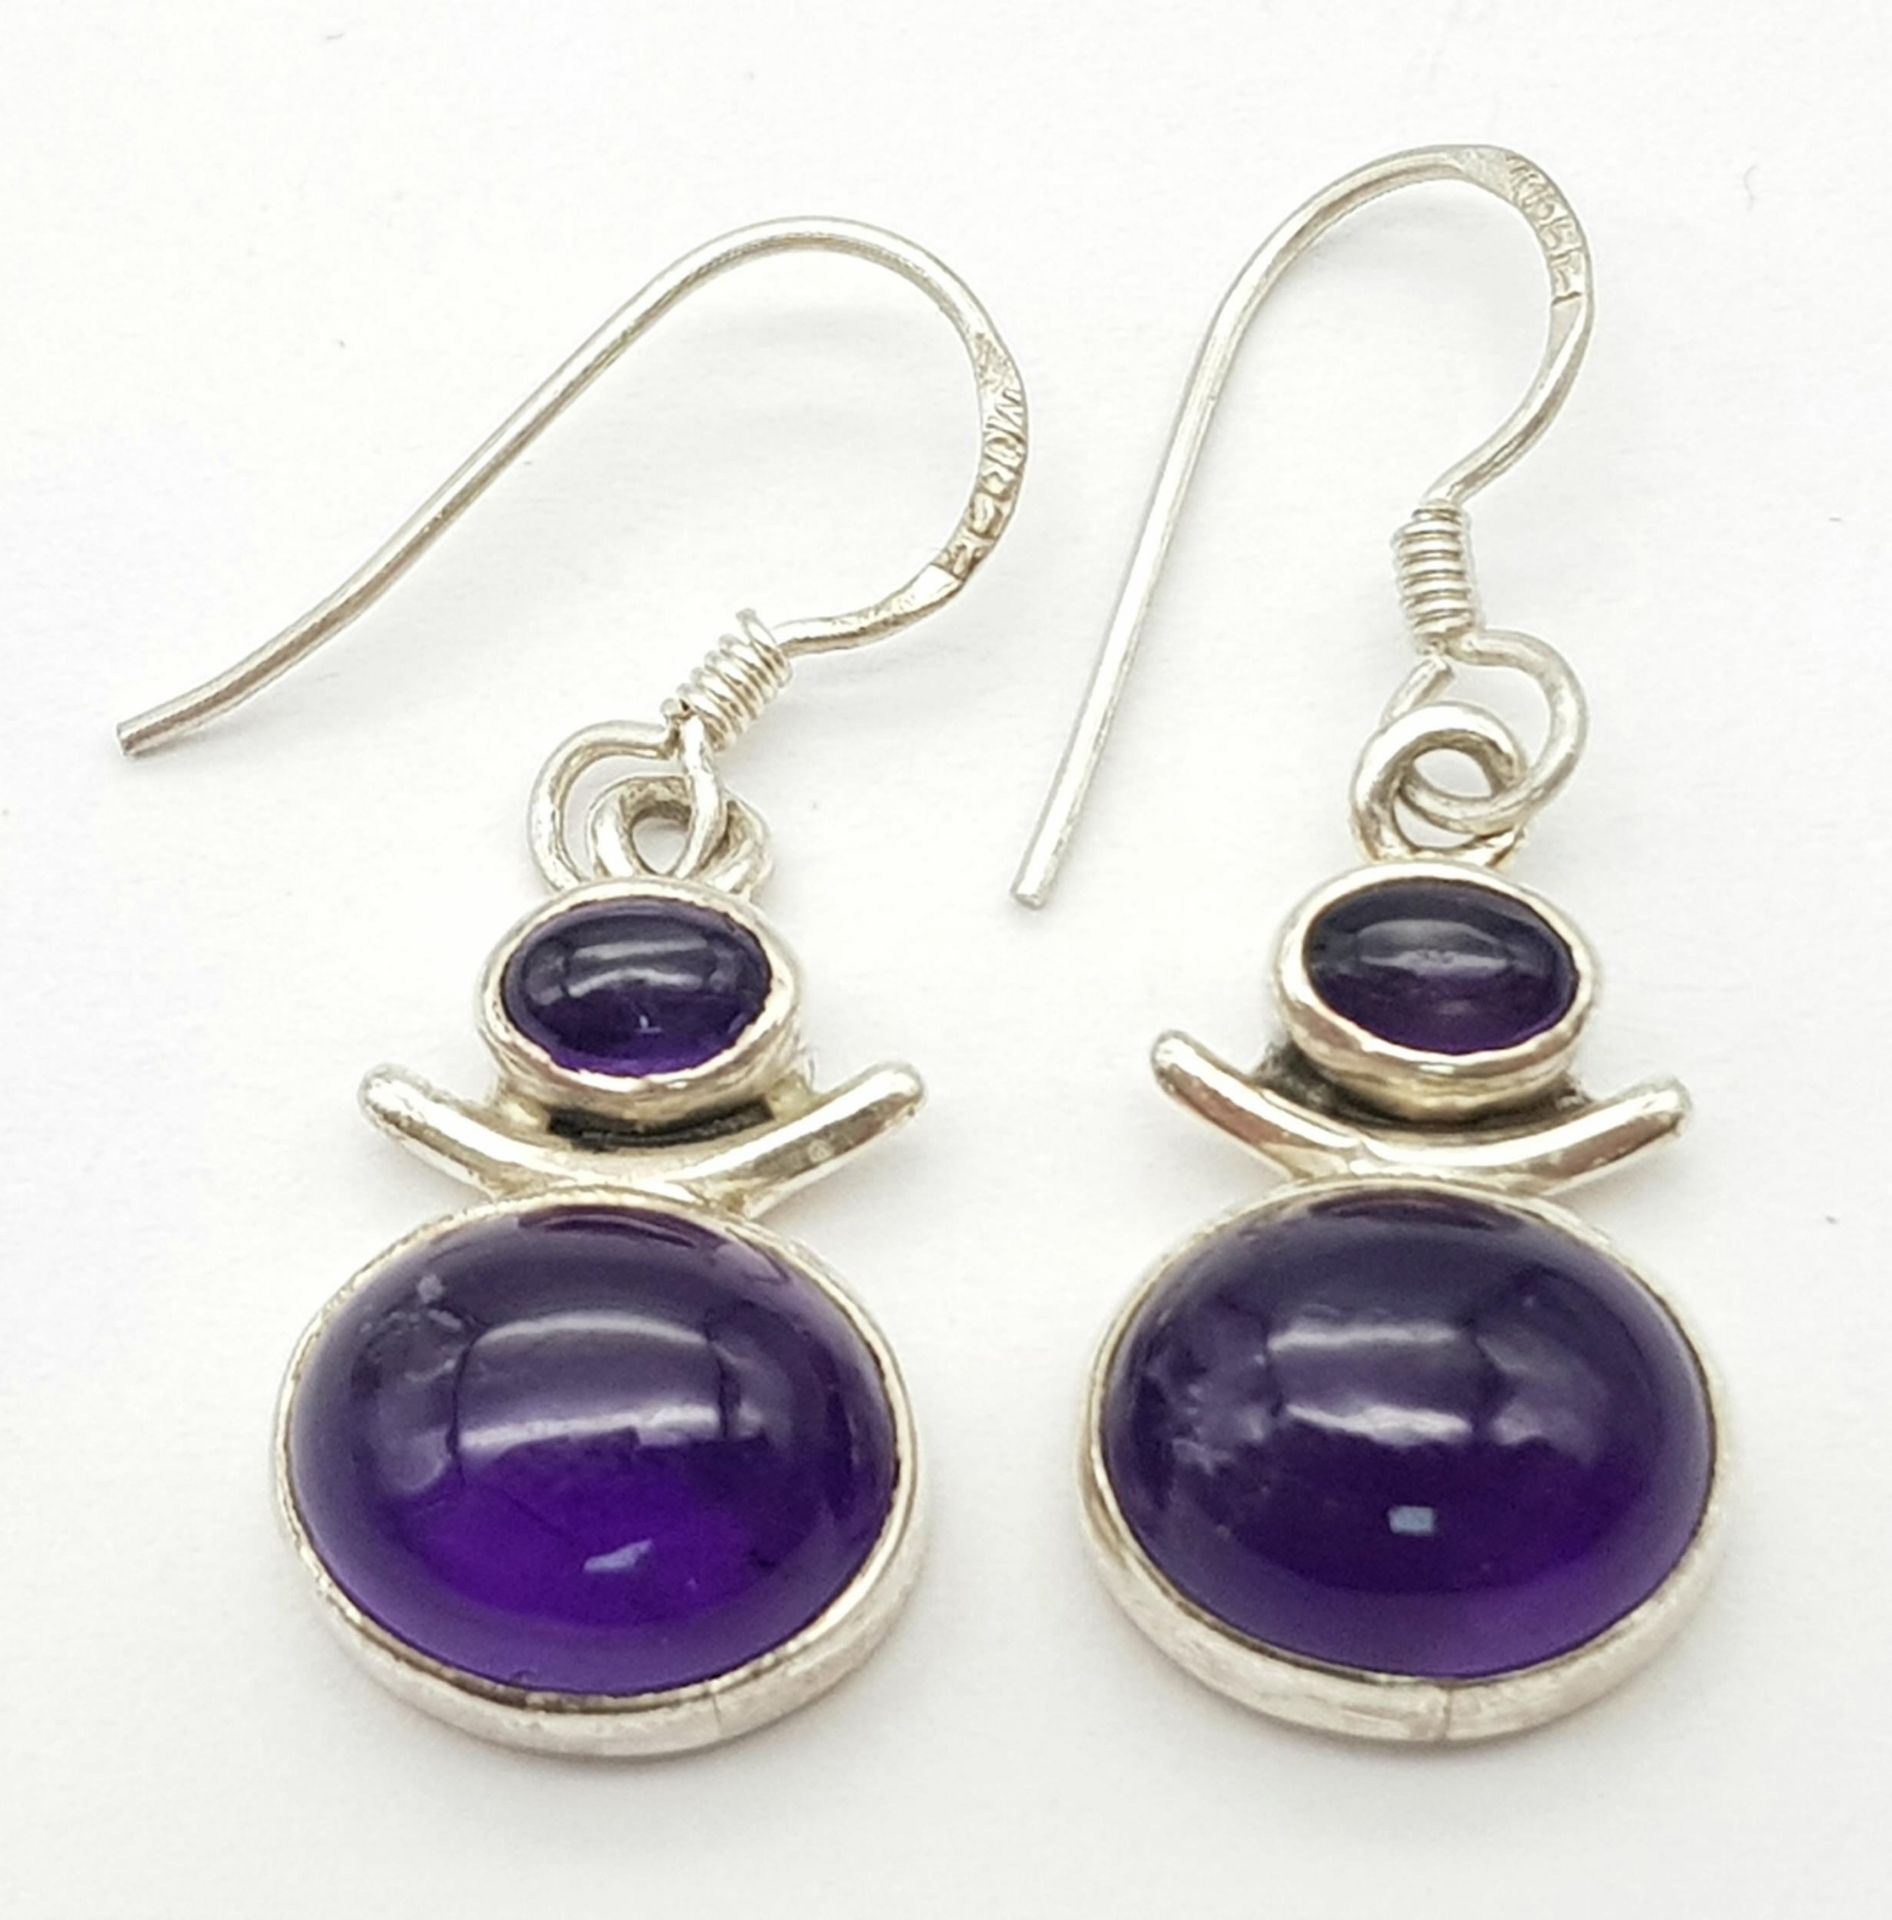 A Pair of Sterling Silver Oval Cut Amethyst Earrings. 3cm Drop. Set with a 1.2cm & 6mm Amethyst